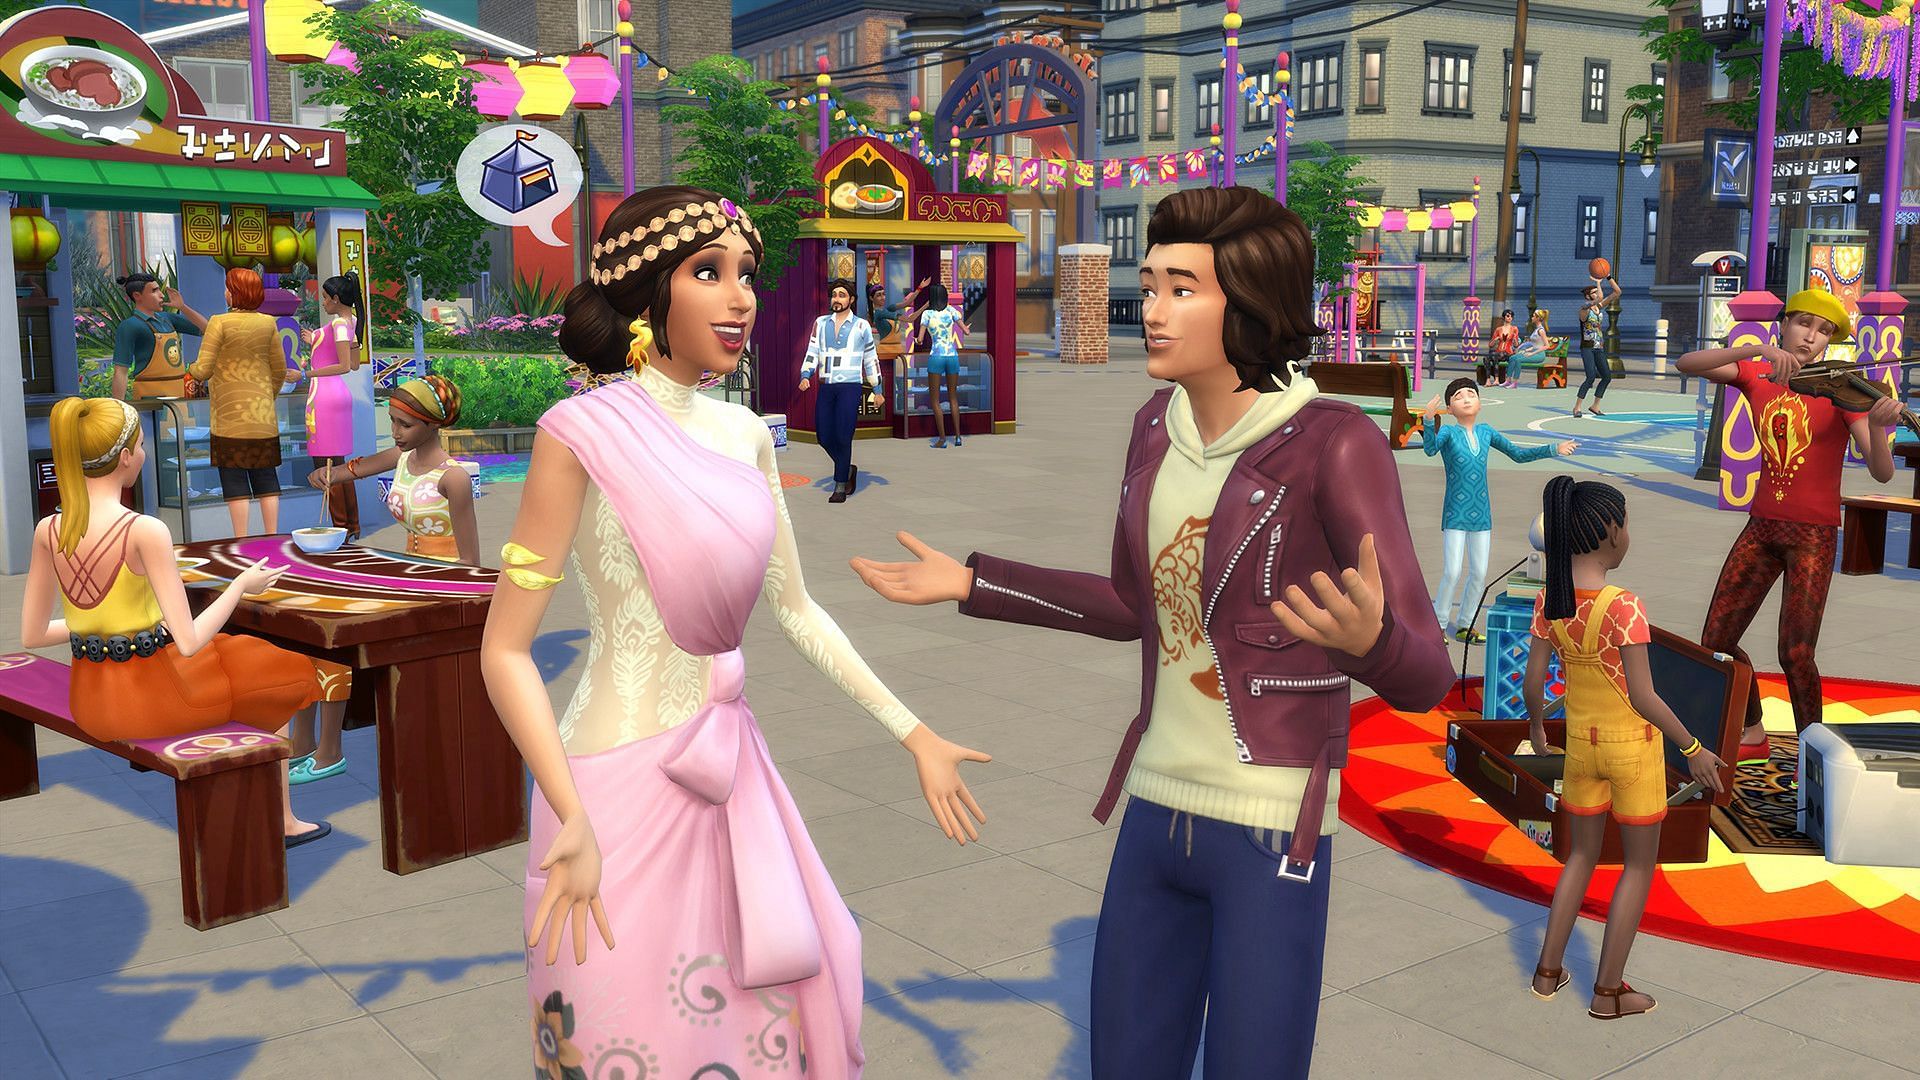 Neighborhood stories need addition of more events to live up to their title (Image via Electronic Arts)